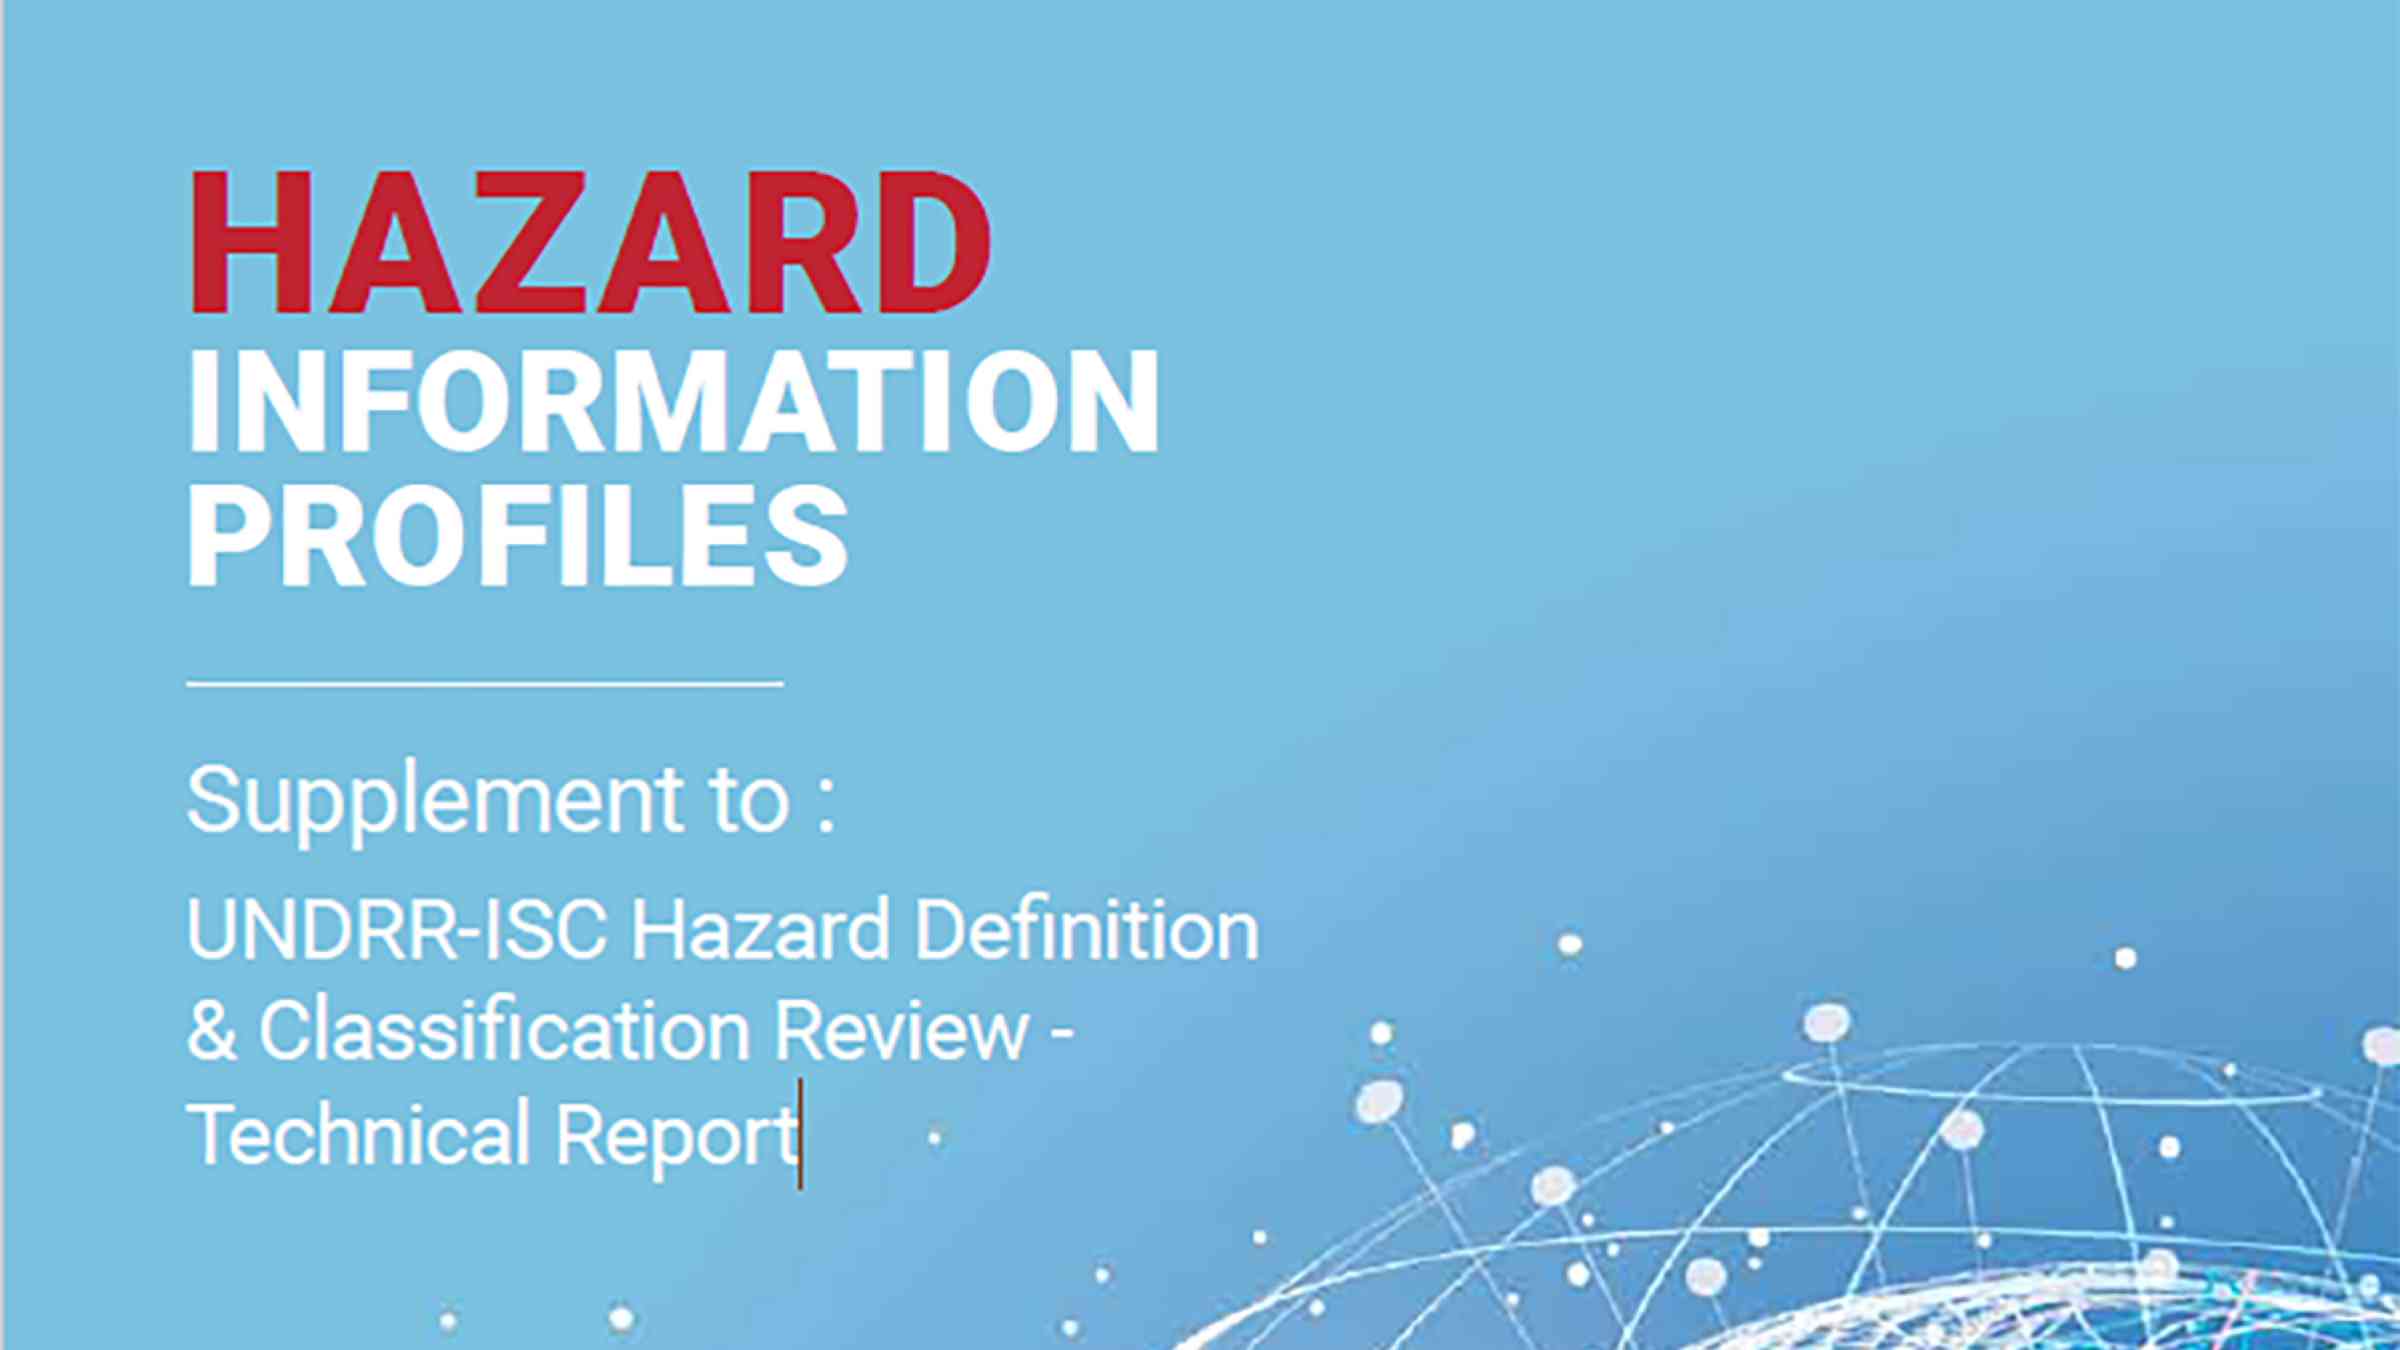 Launch of the UNDRR/ISC Hazard Information Profiles: Supplement to UNDRR/ISC Hazard Definition & Classification Review: Technical Report (2020) 